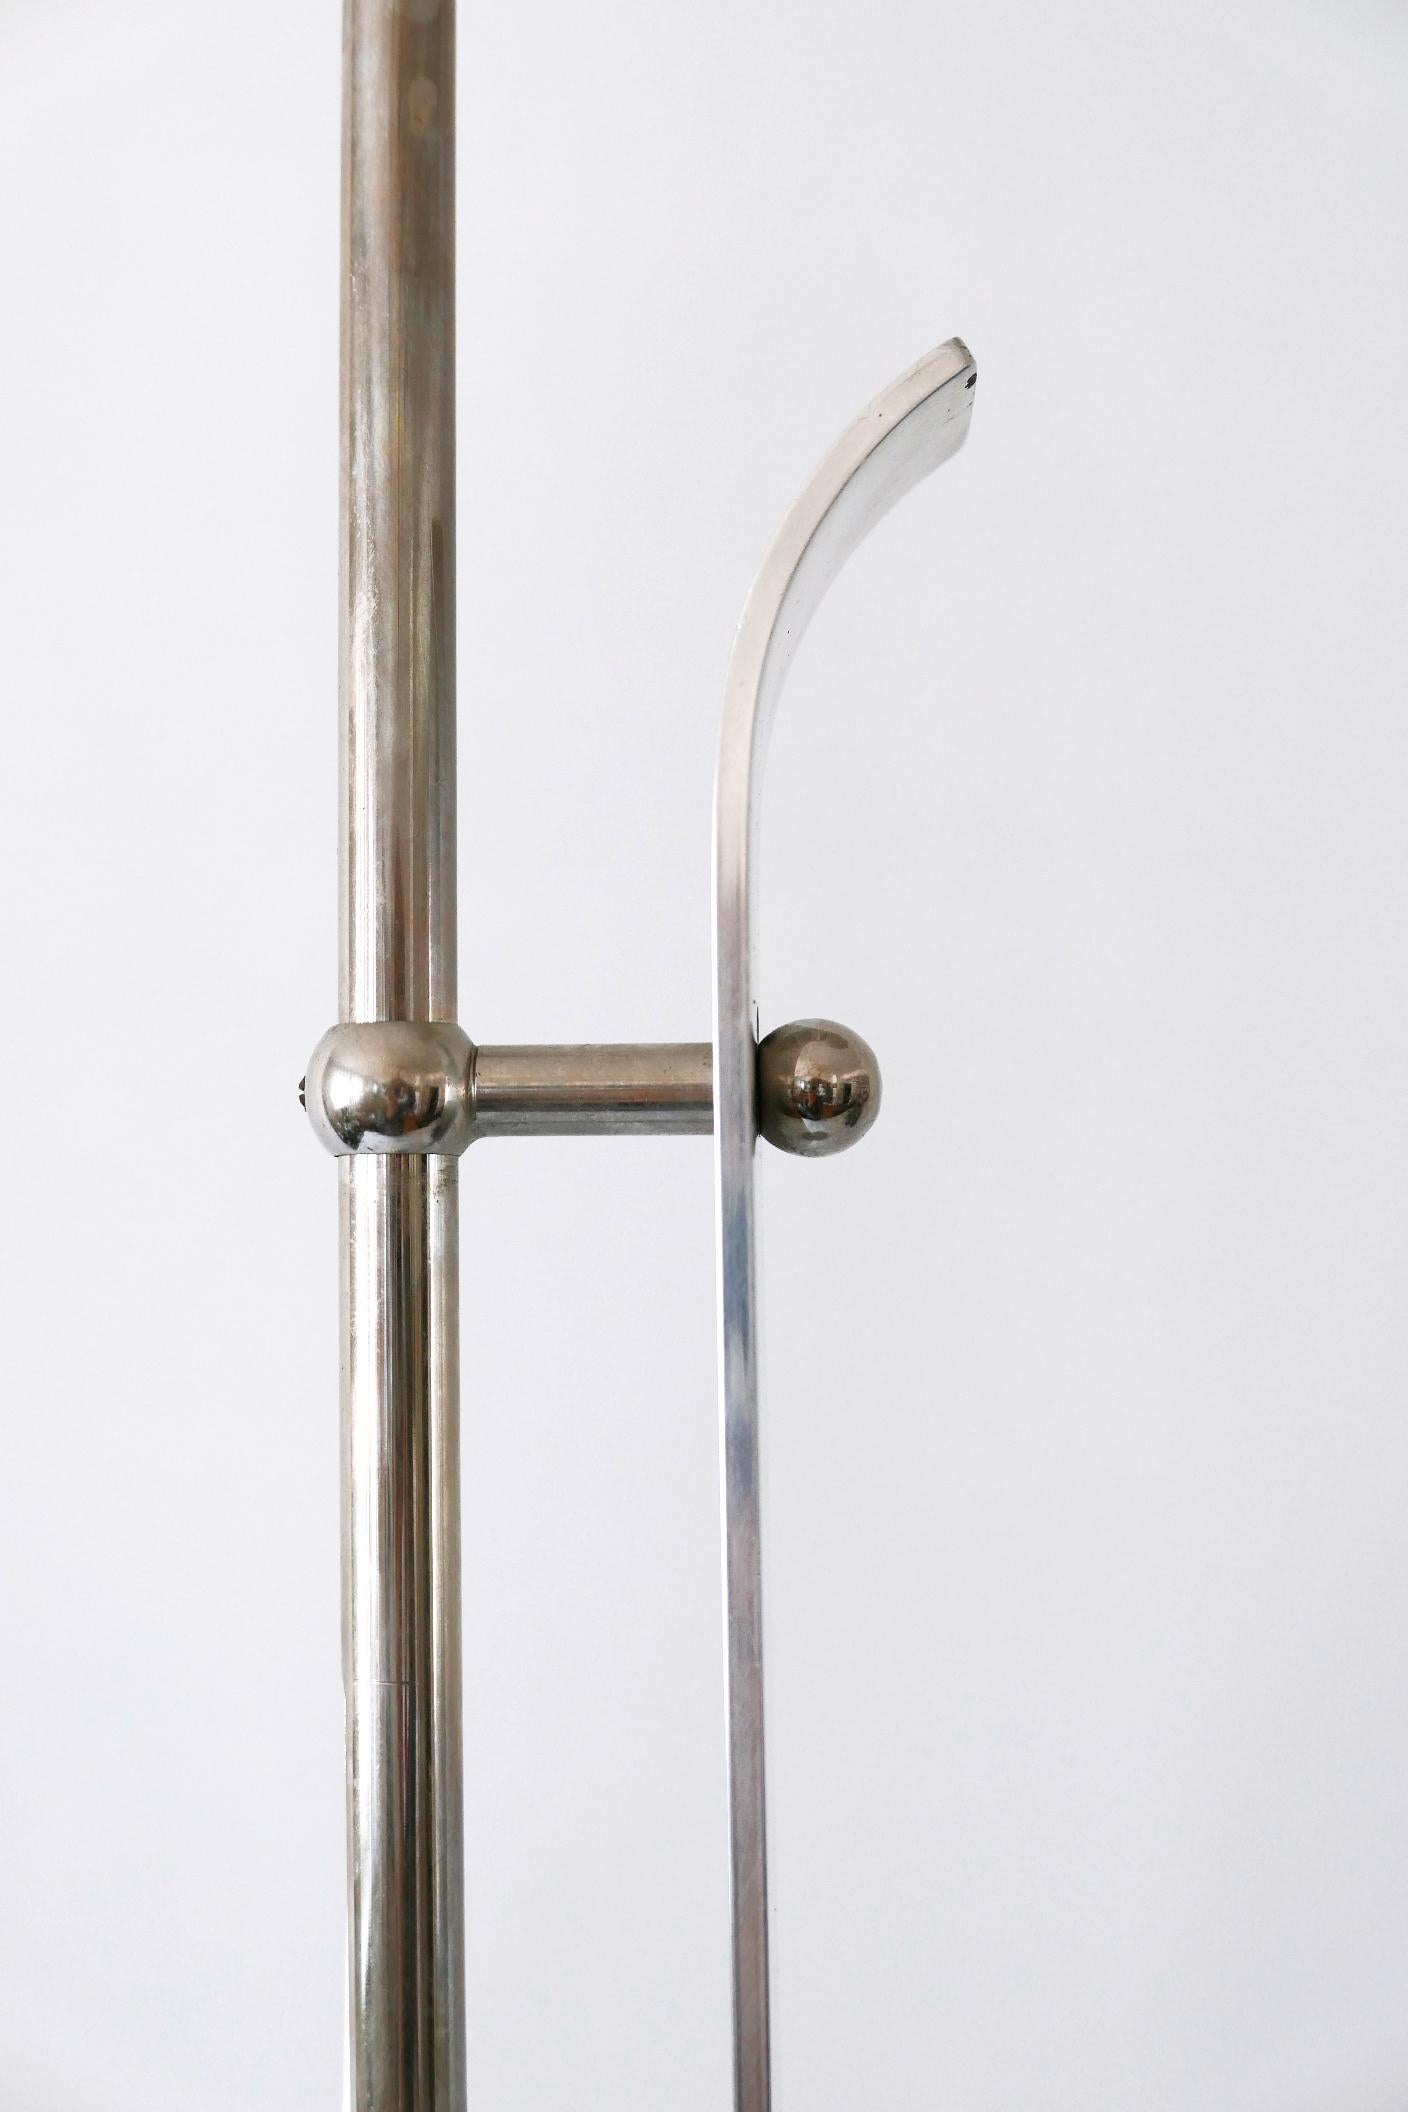 Bauhaus Floor Lamp by Karl Trabert for Schanzenbach & Co 1930s Germany For Sale 11